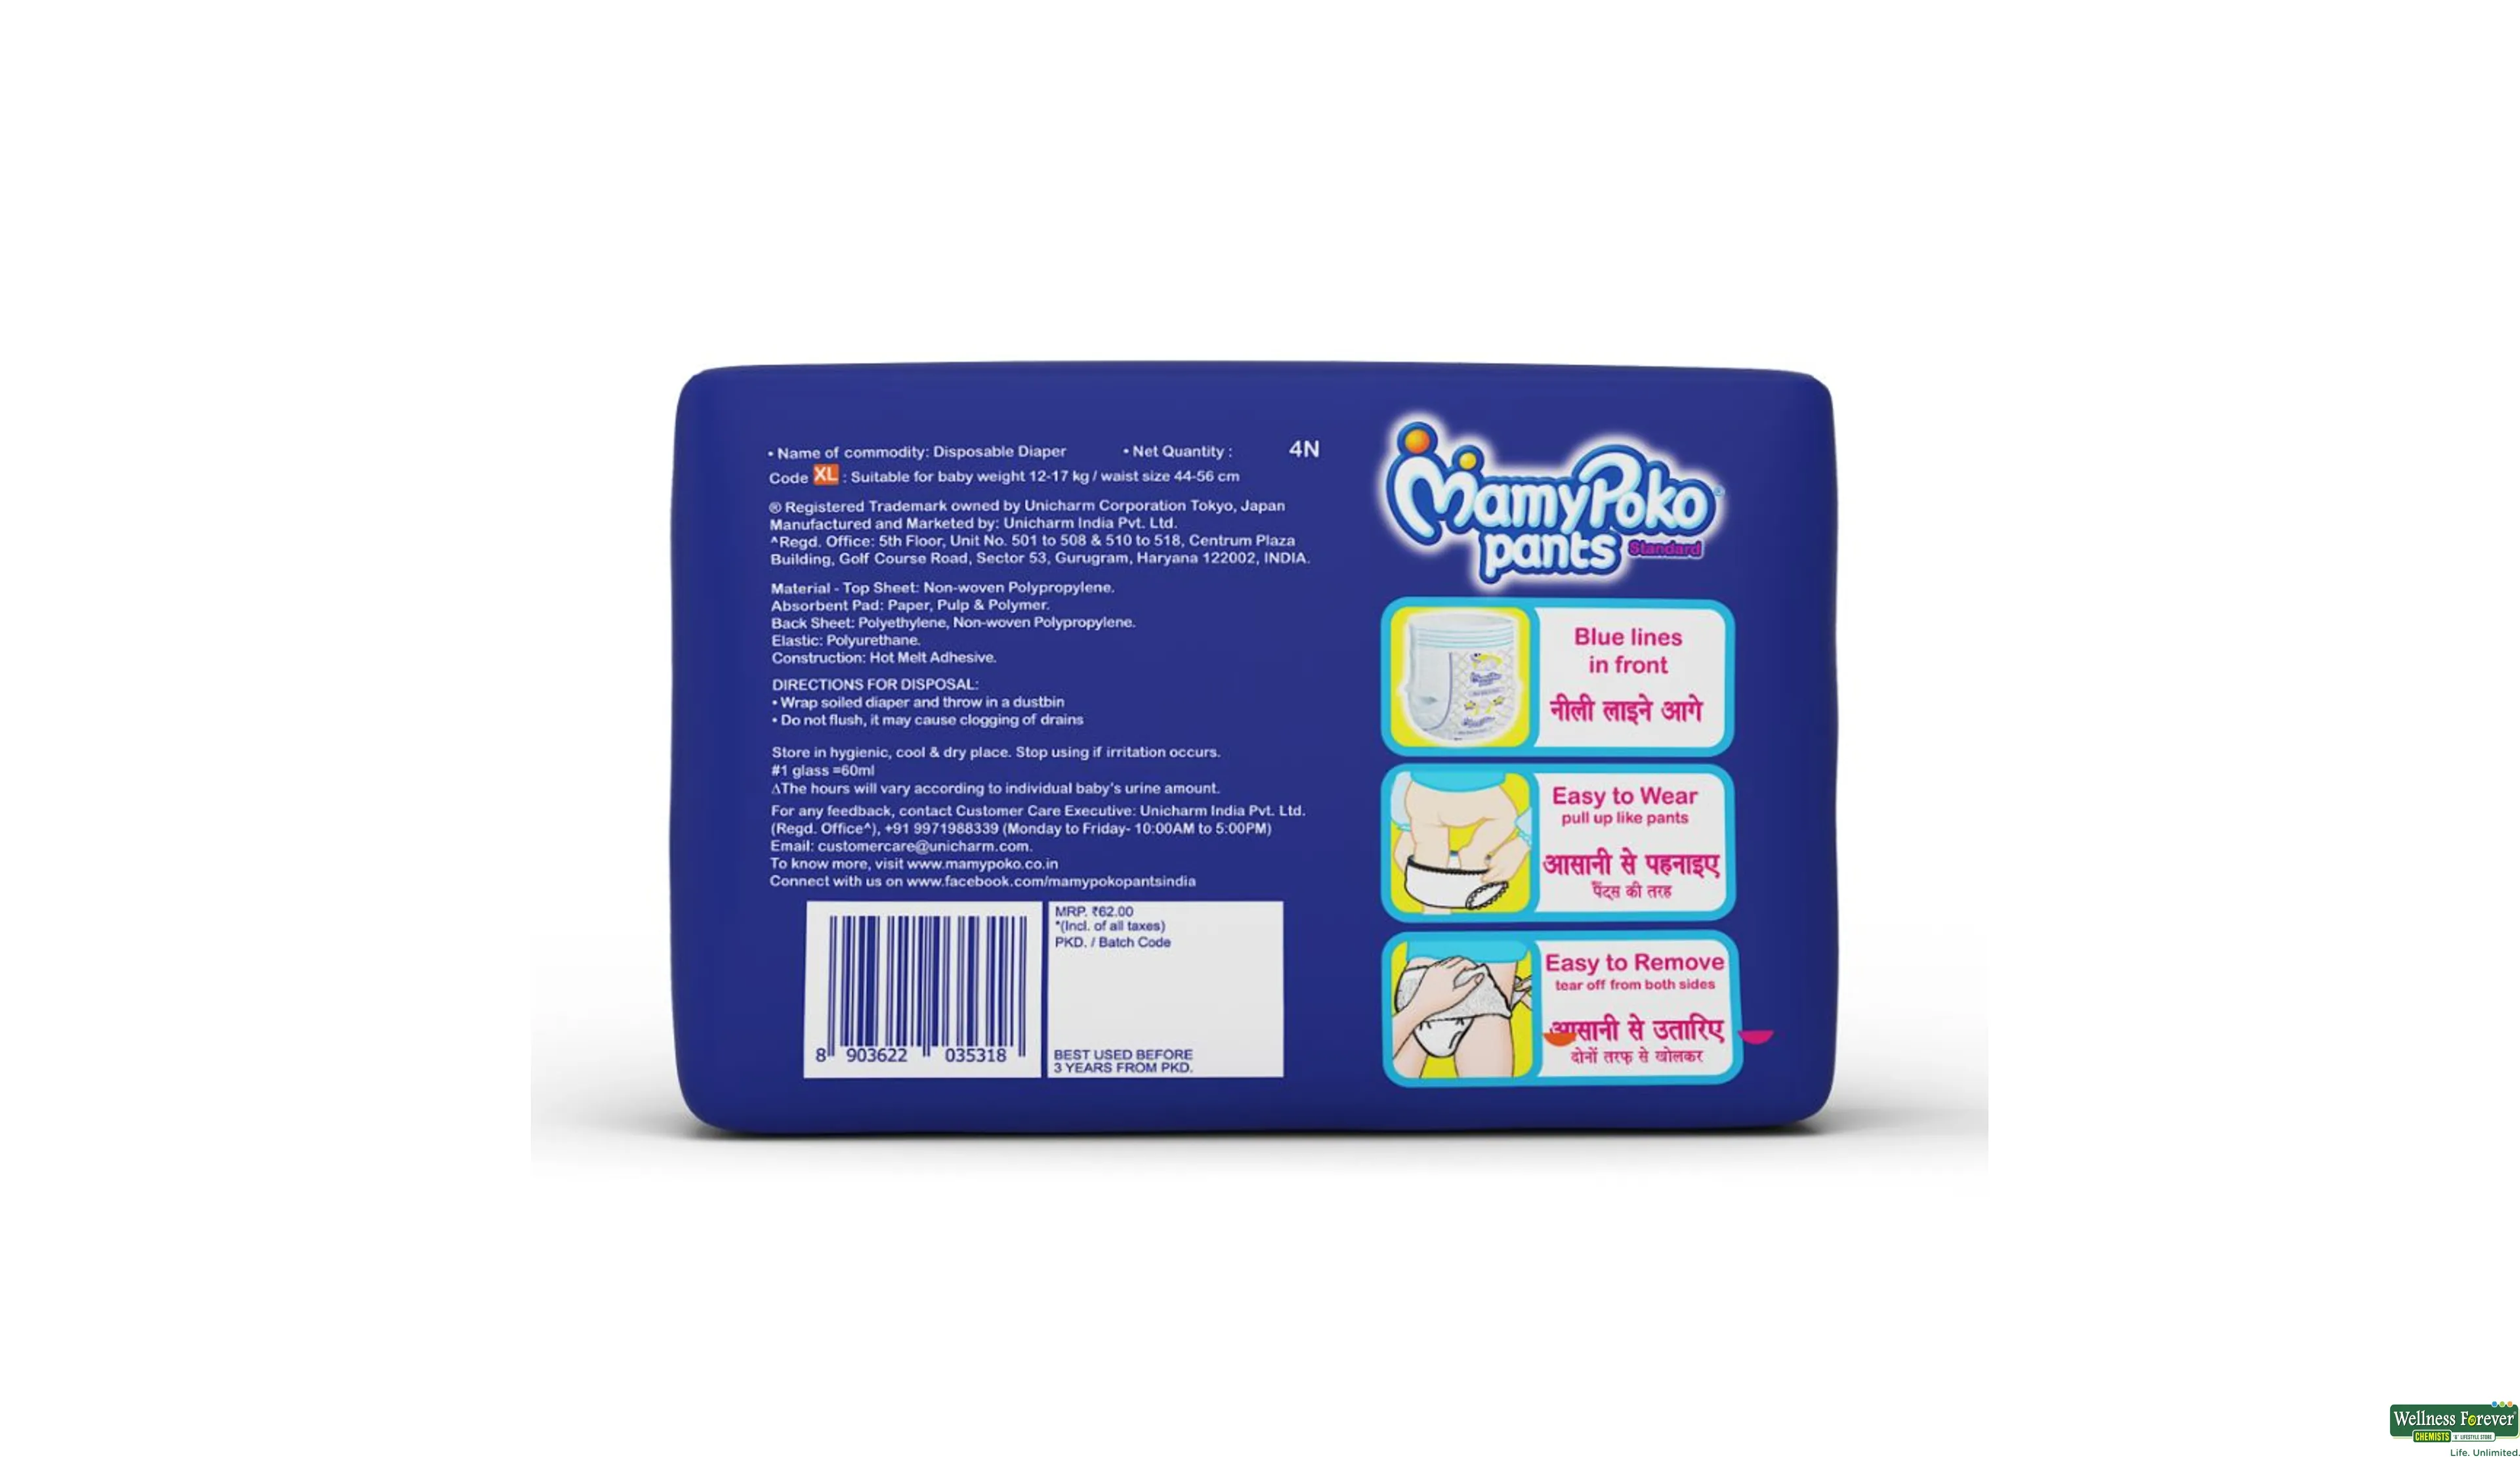 MamyPoko Pants for New Born (10 Count)